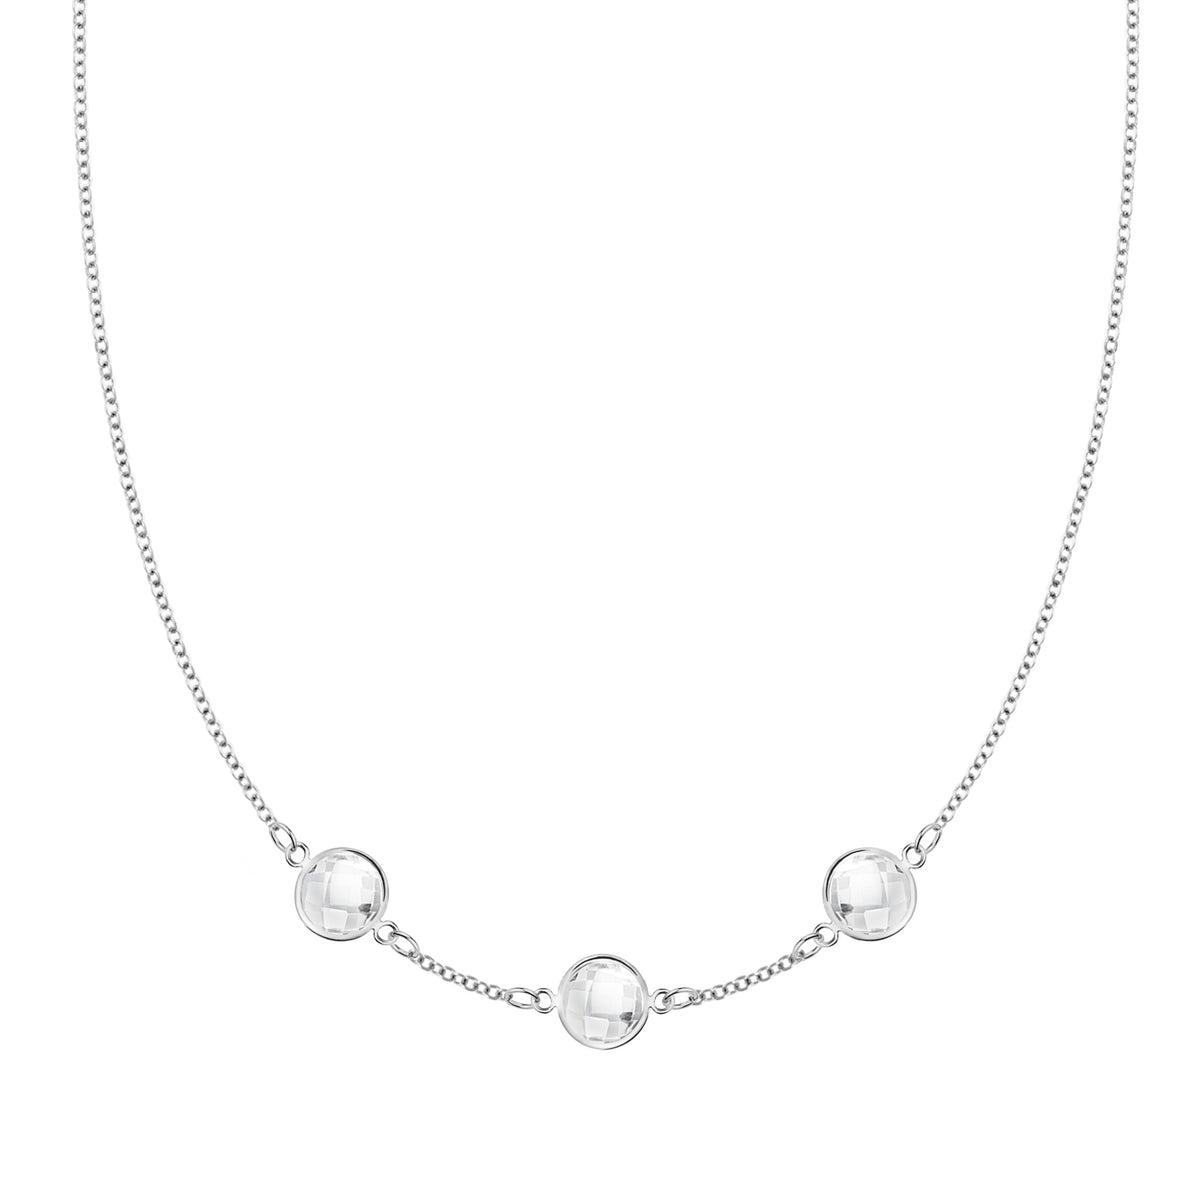 Chain Extender, 3 Inches Adjustable, Sterling Silver | Silver Jewelry Stores Long Island